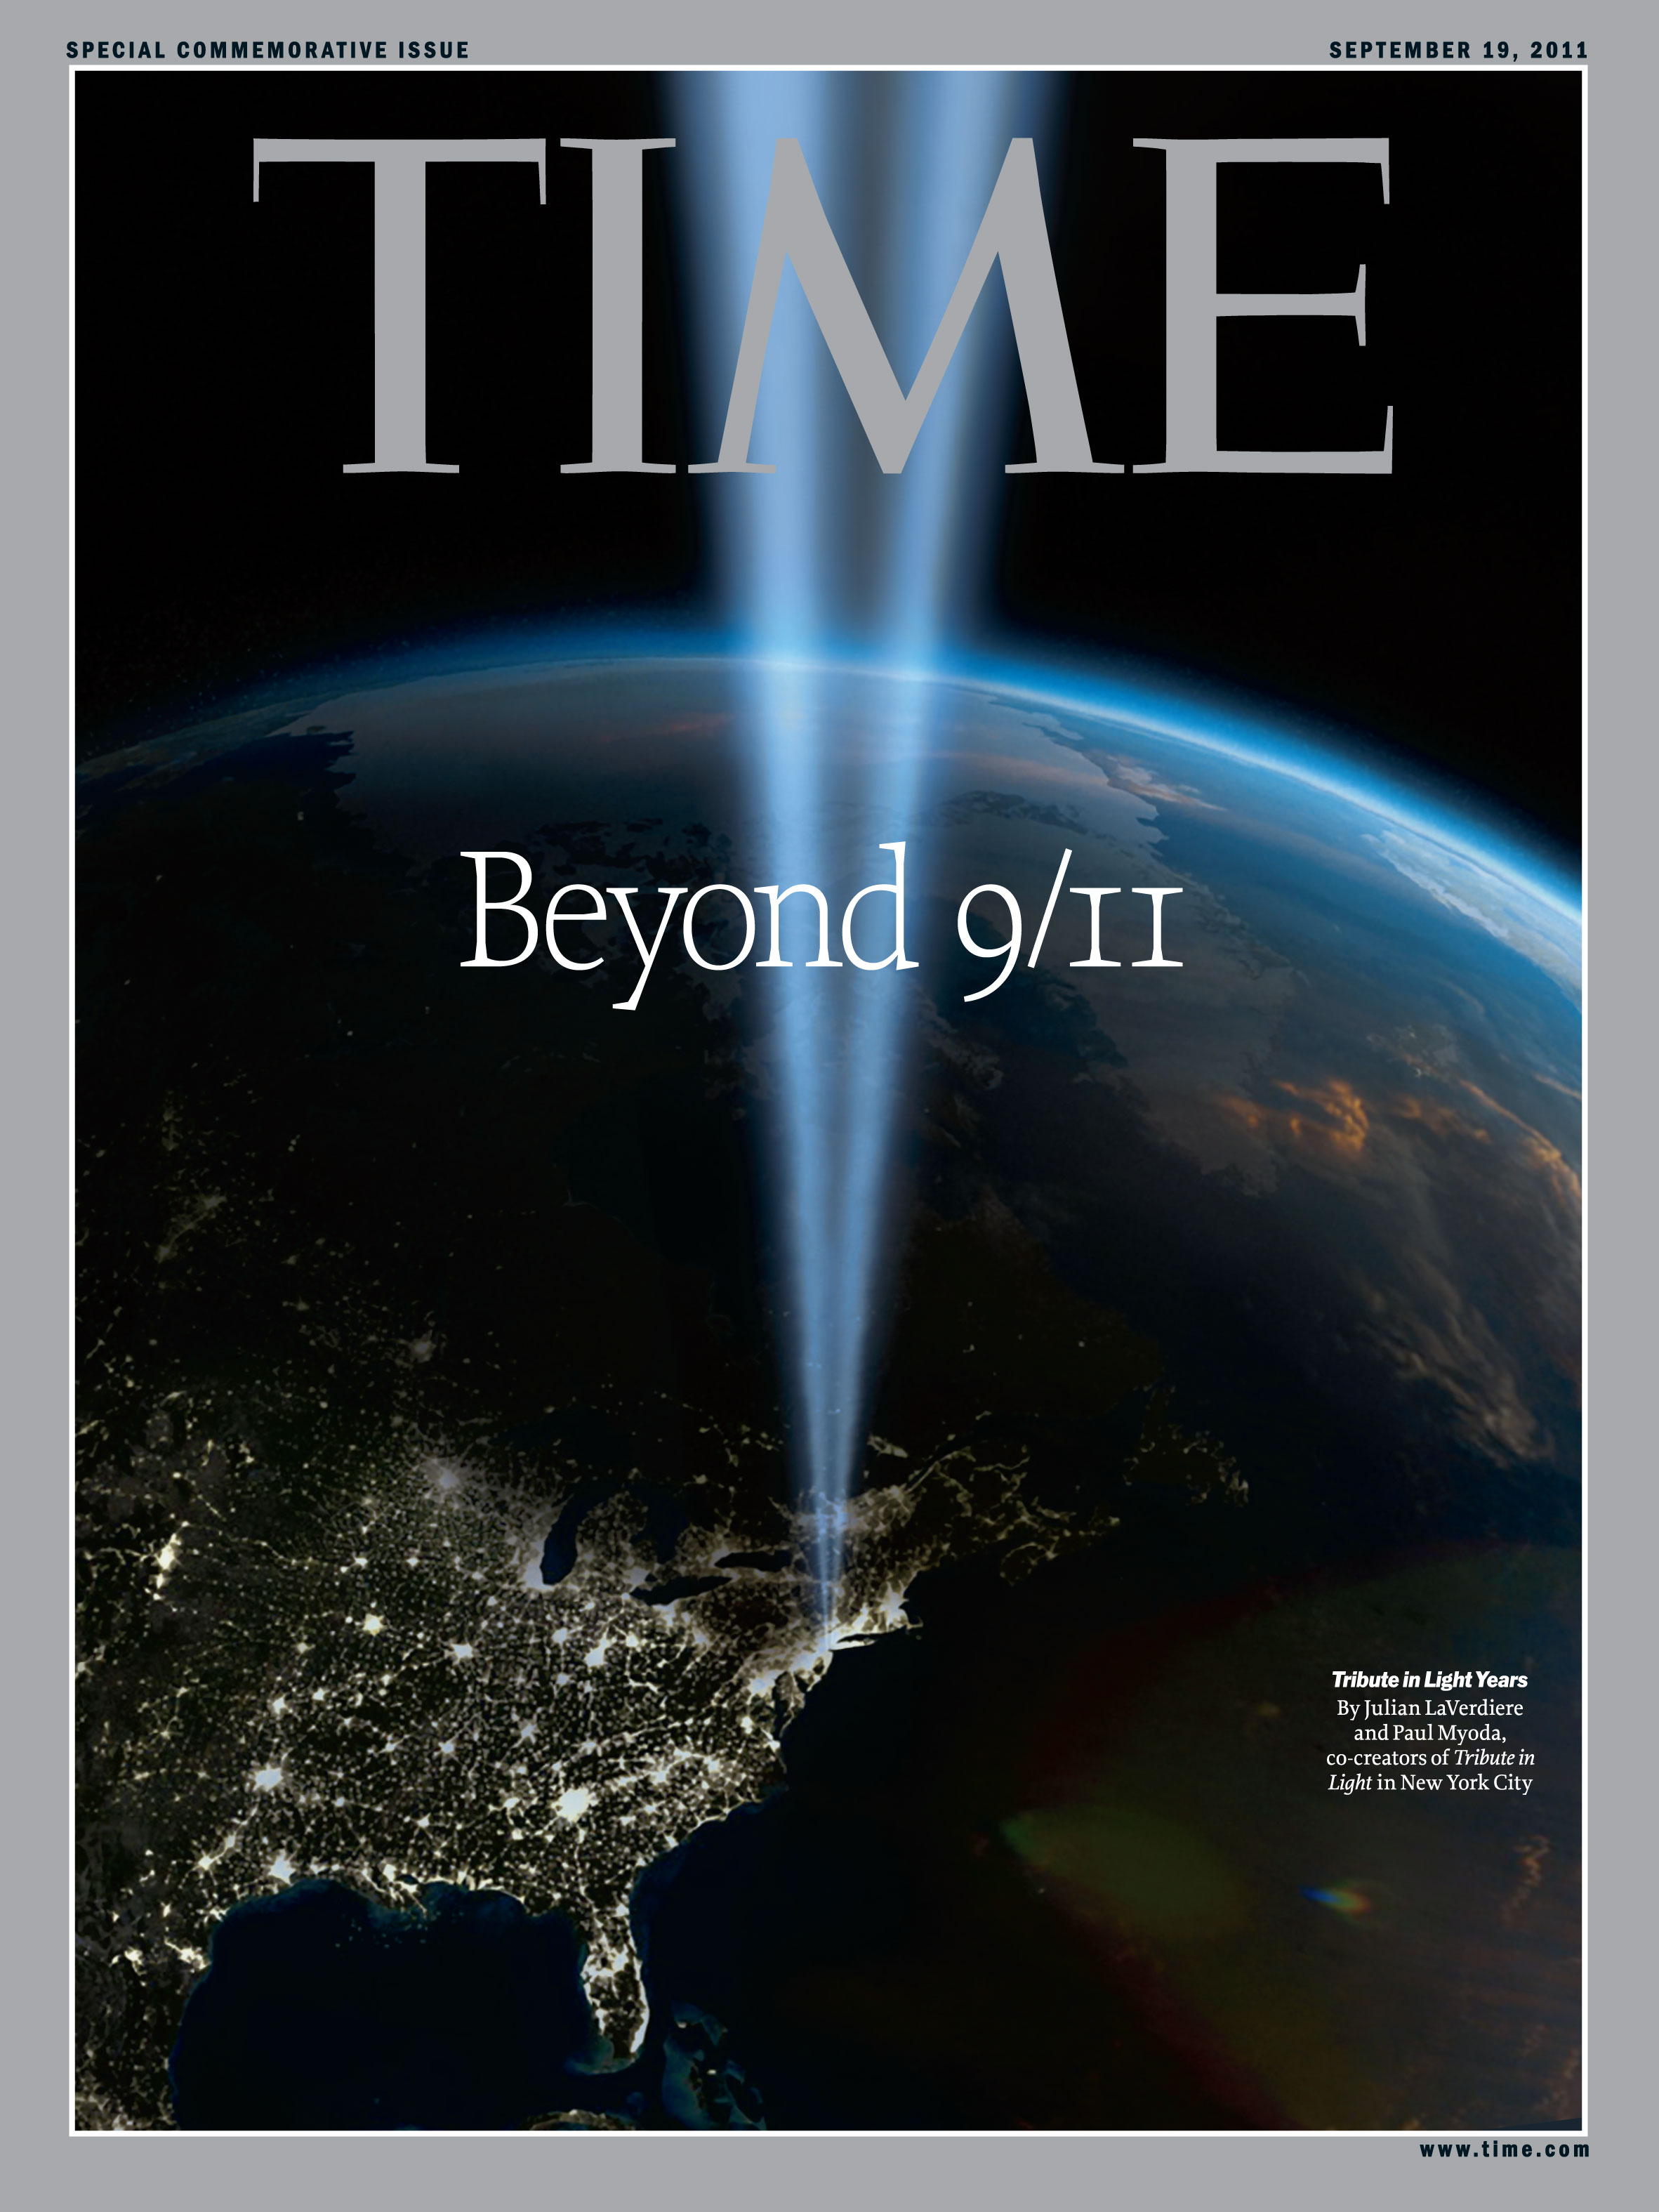  Photo-Illustration by Julian LaVerdiere and Paul Myoda for TIME 